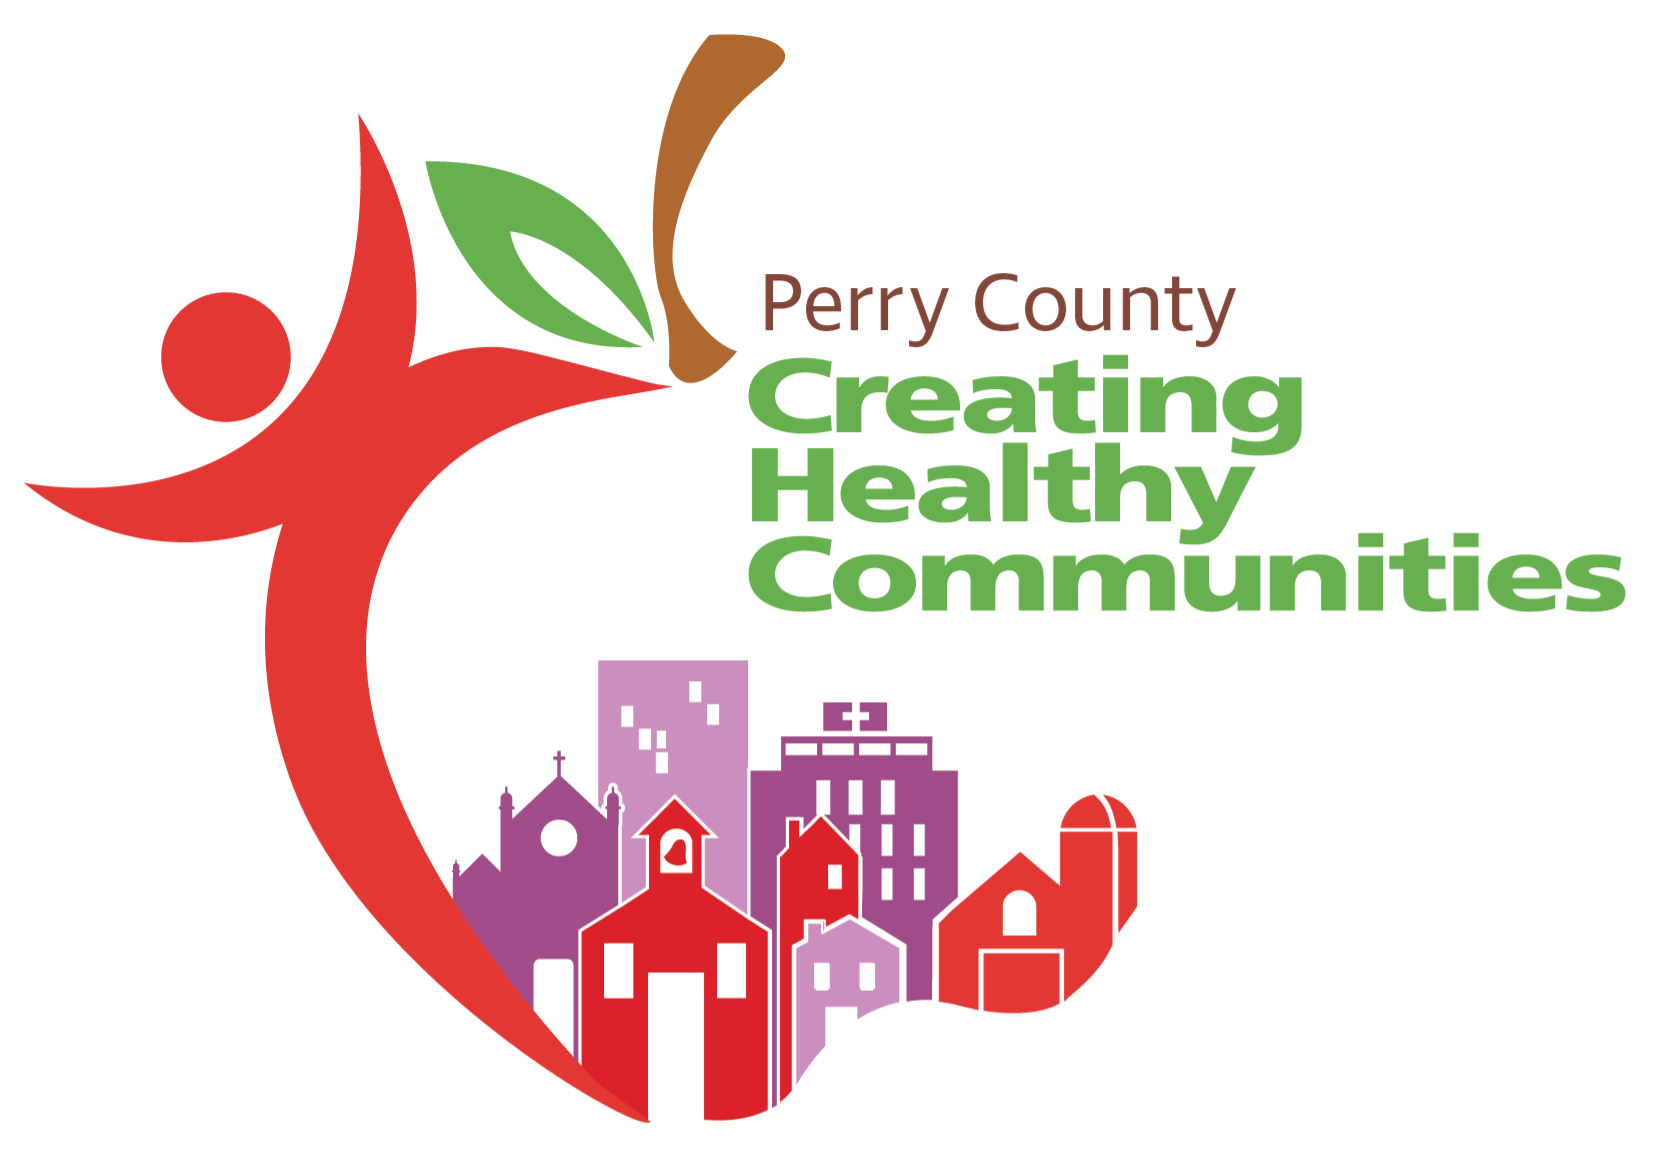 Perry County Creating Healthy Communities logo